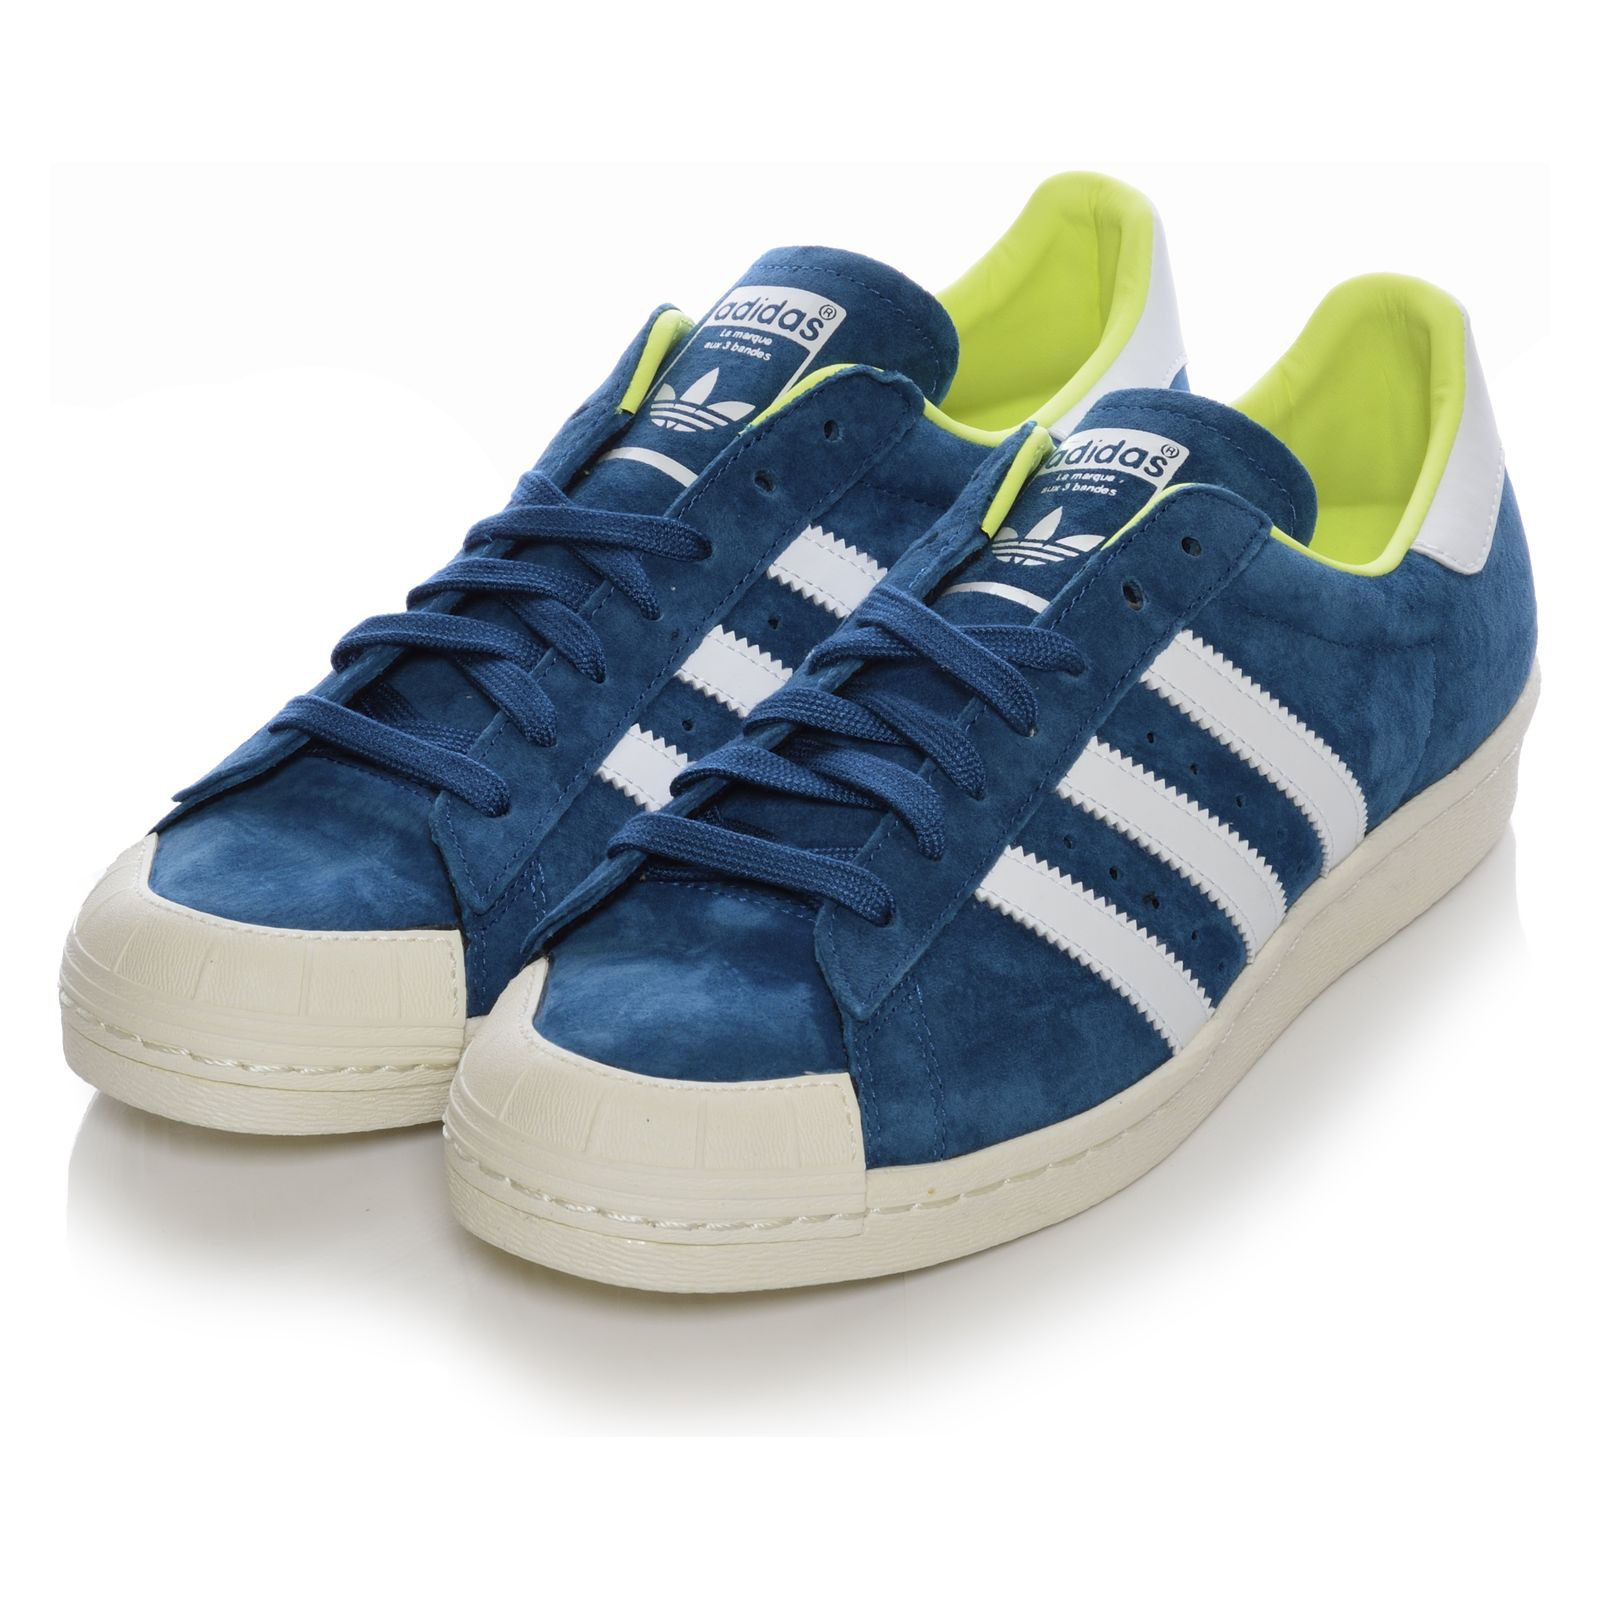 ADIDAS ORIGINALS SUPERSTAR 80s HALFSHELL SHOES LEATHER SNEAKERS BLUE 36 ...